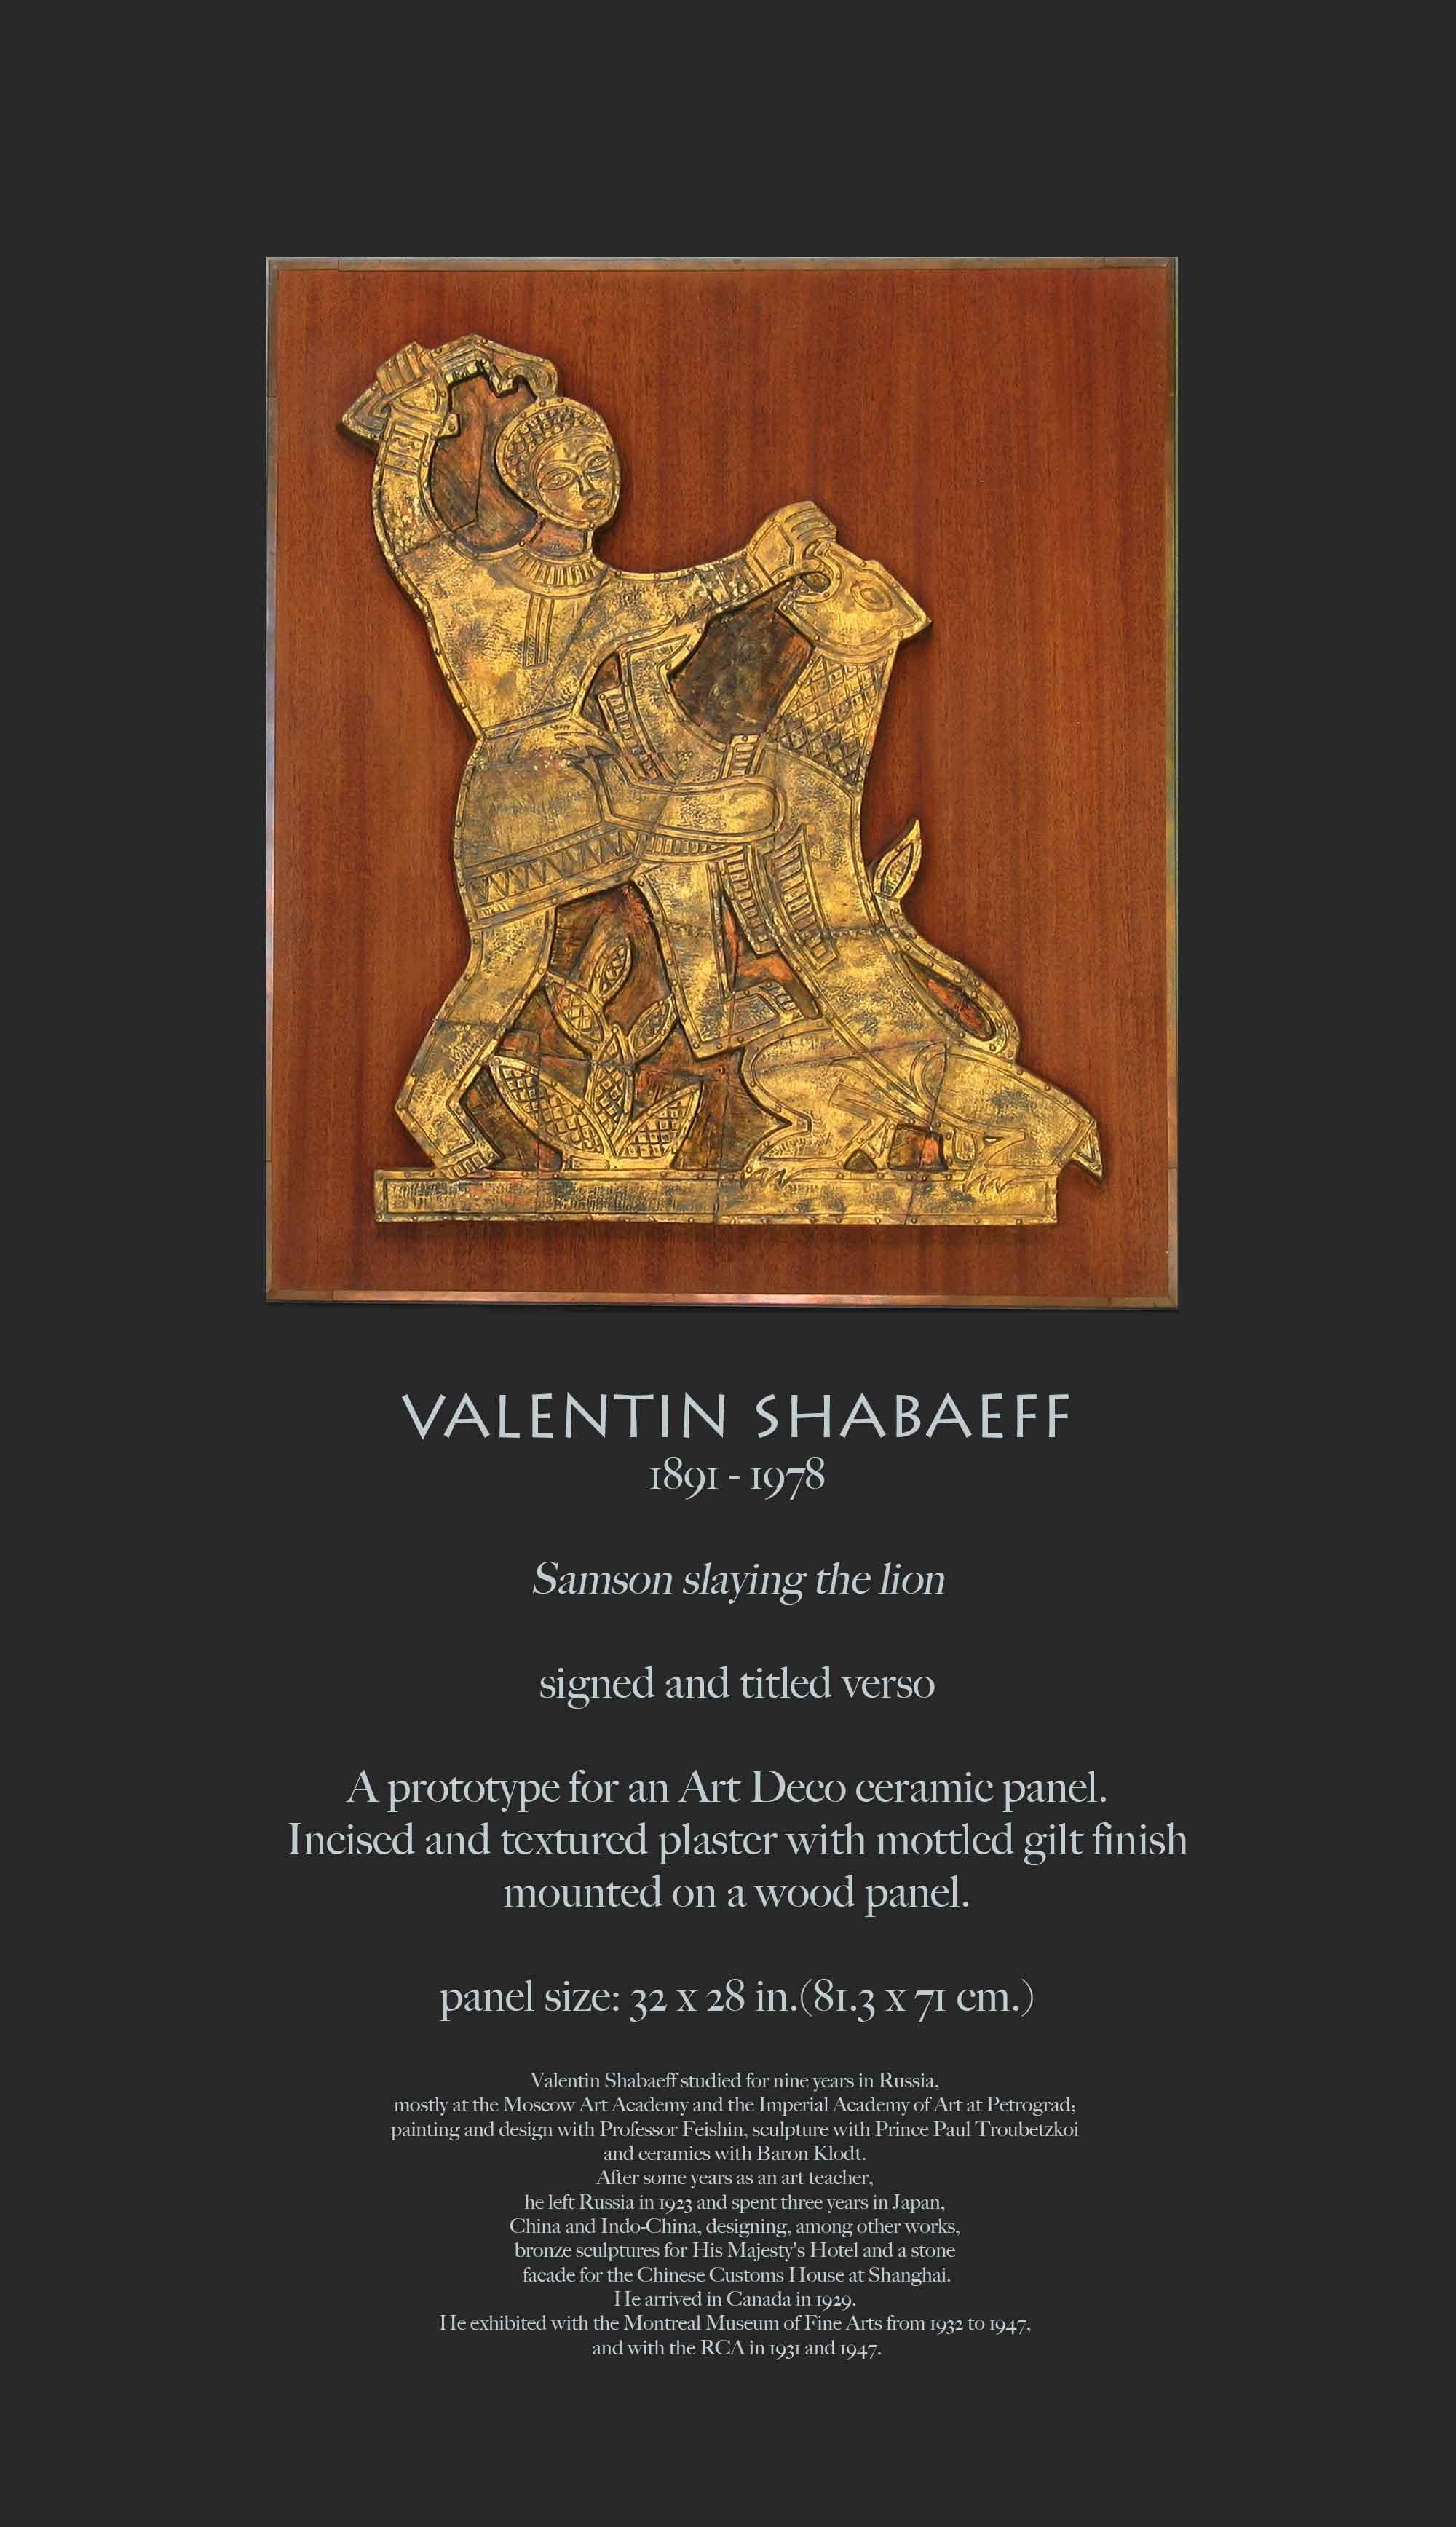 VALENTIN SHABAEFF
1891 - 1978

Samson slaying the lion.

Signed and titled verso.

A PROTOTYPE for an Art Deco ceramic panel. 
Incised and textured plaster with mottled gilt finish & mounted on a wood panel.

Panel size: 32